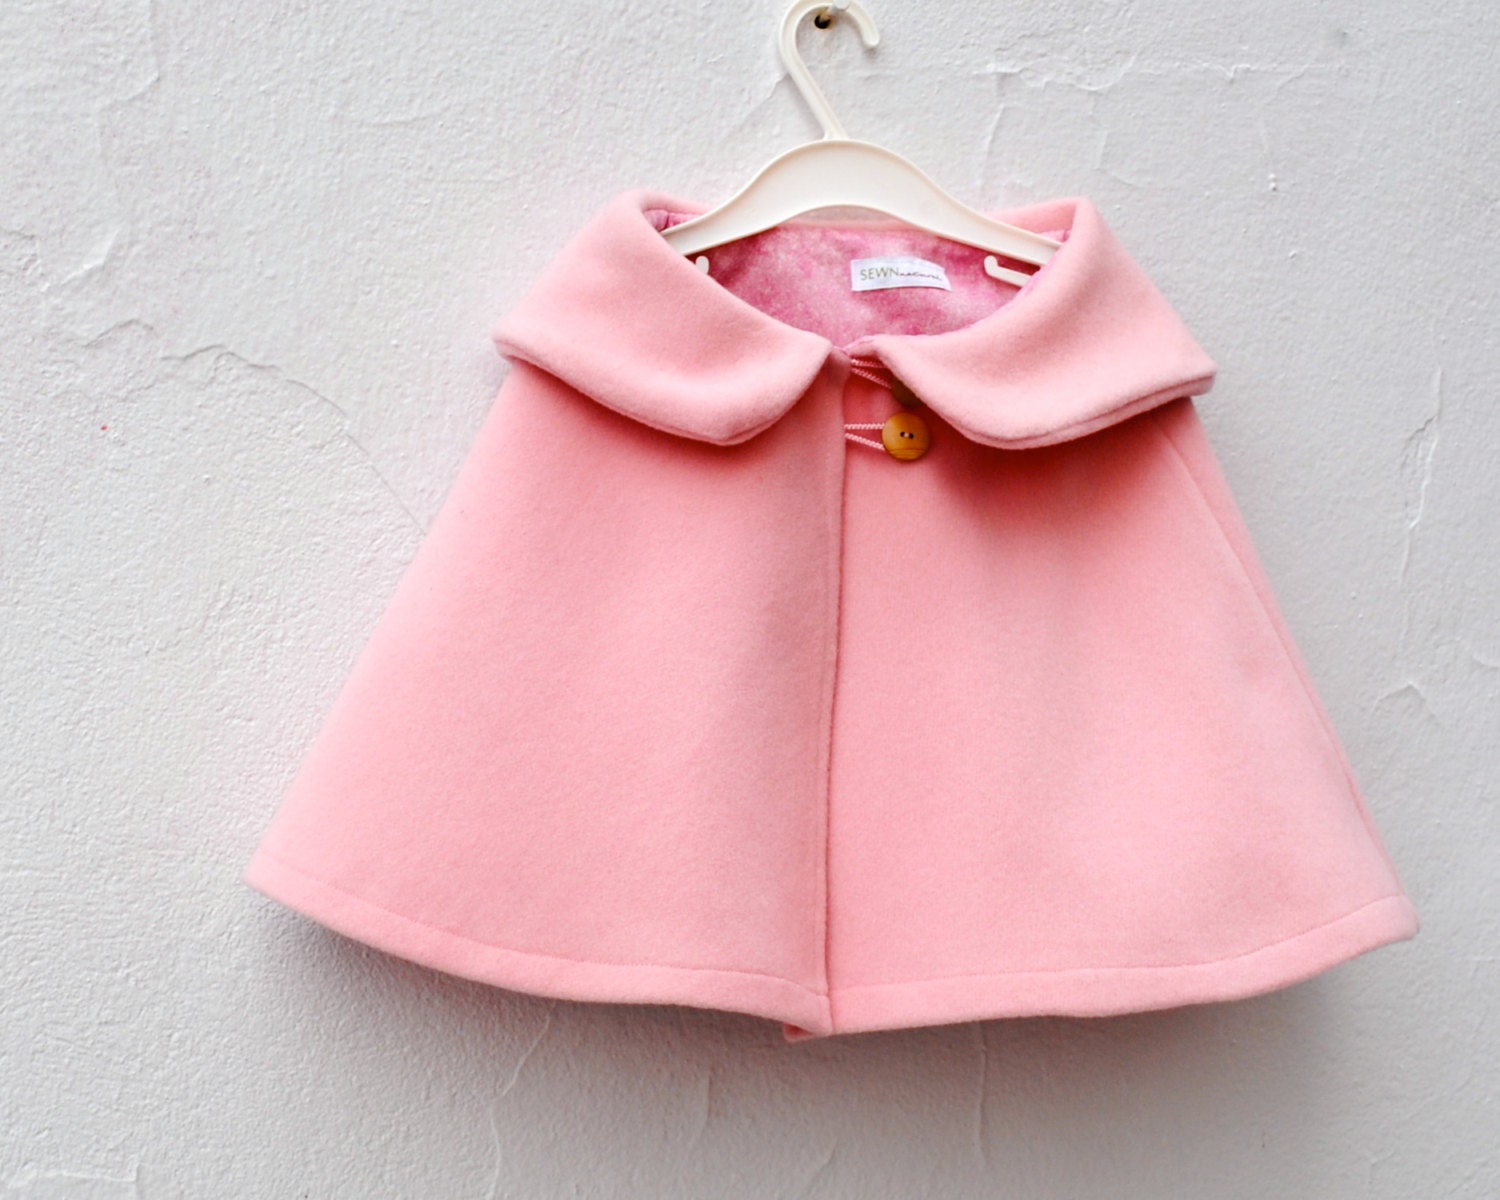 Girls Cape in Pink Wool - Kids Shrug Capelet with Peter Pan Collar Size 3T to 5T - Spring Fashion (Ready to Ship)